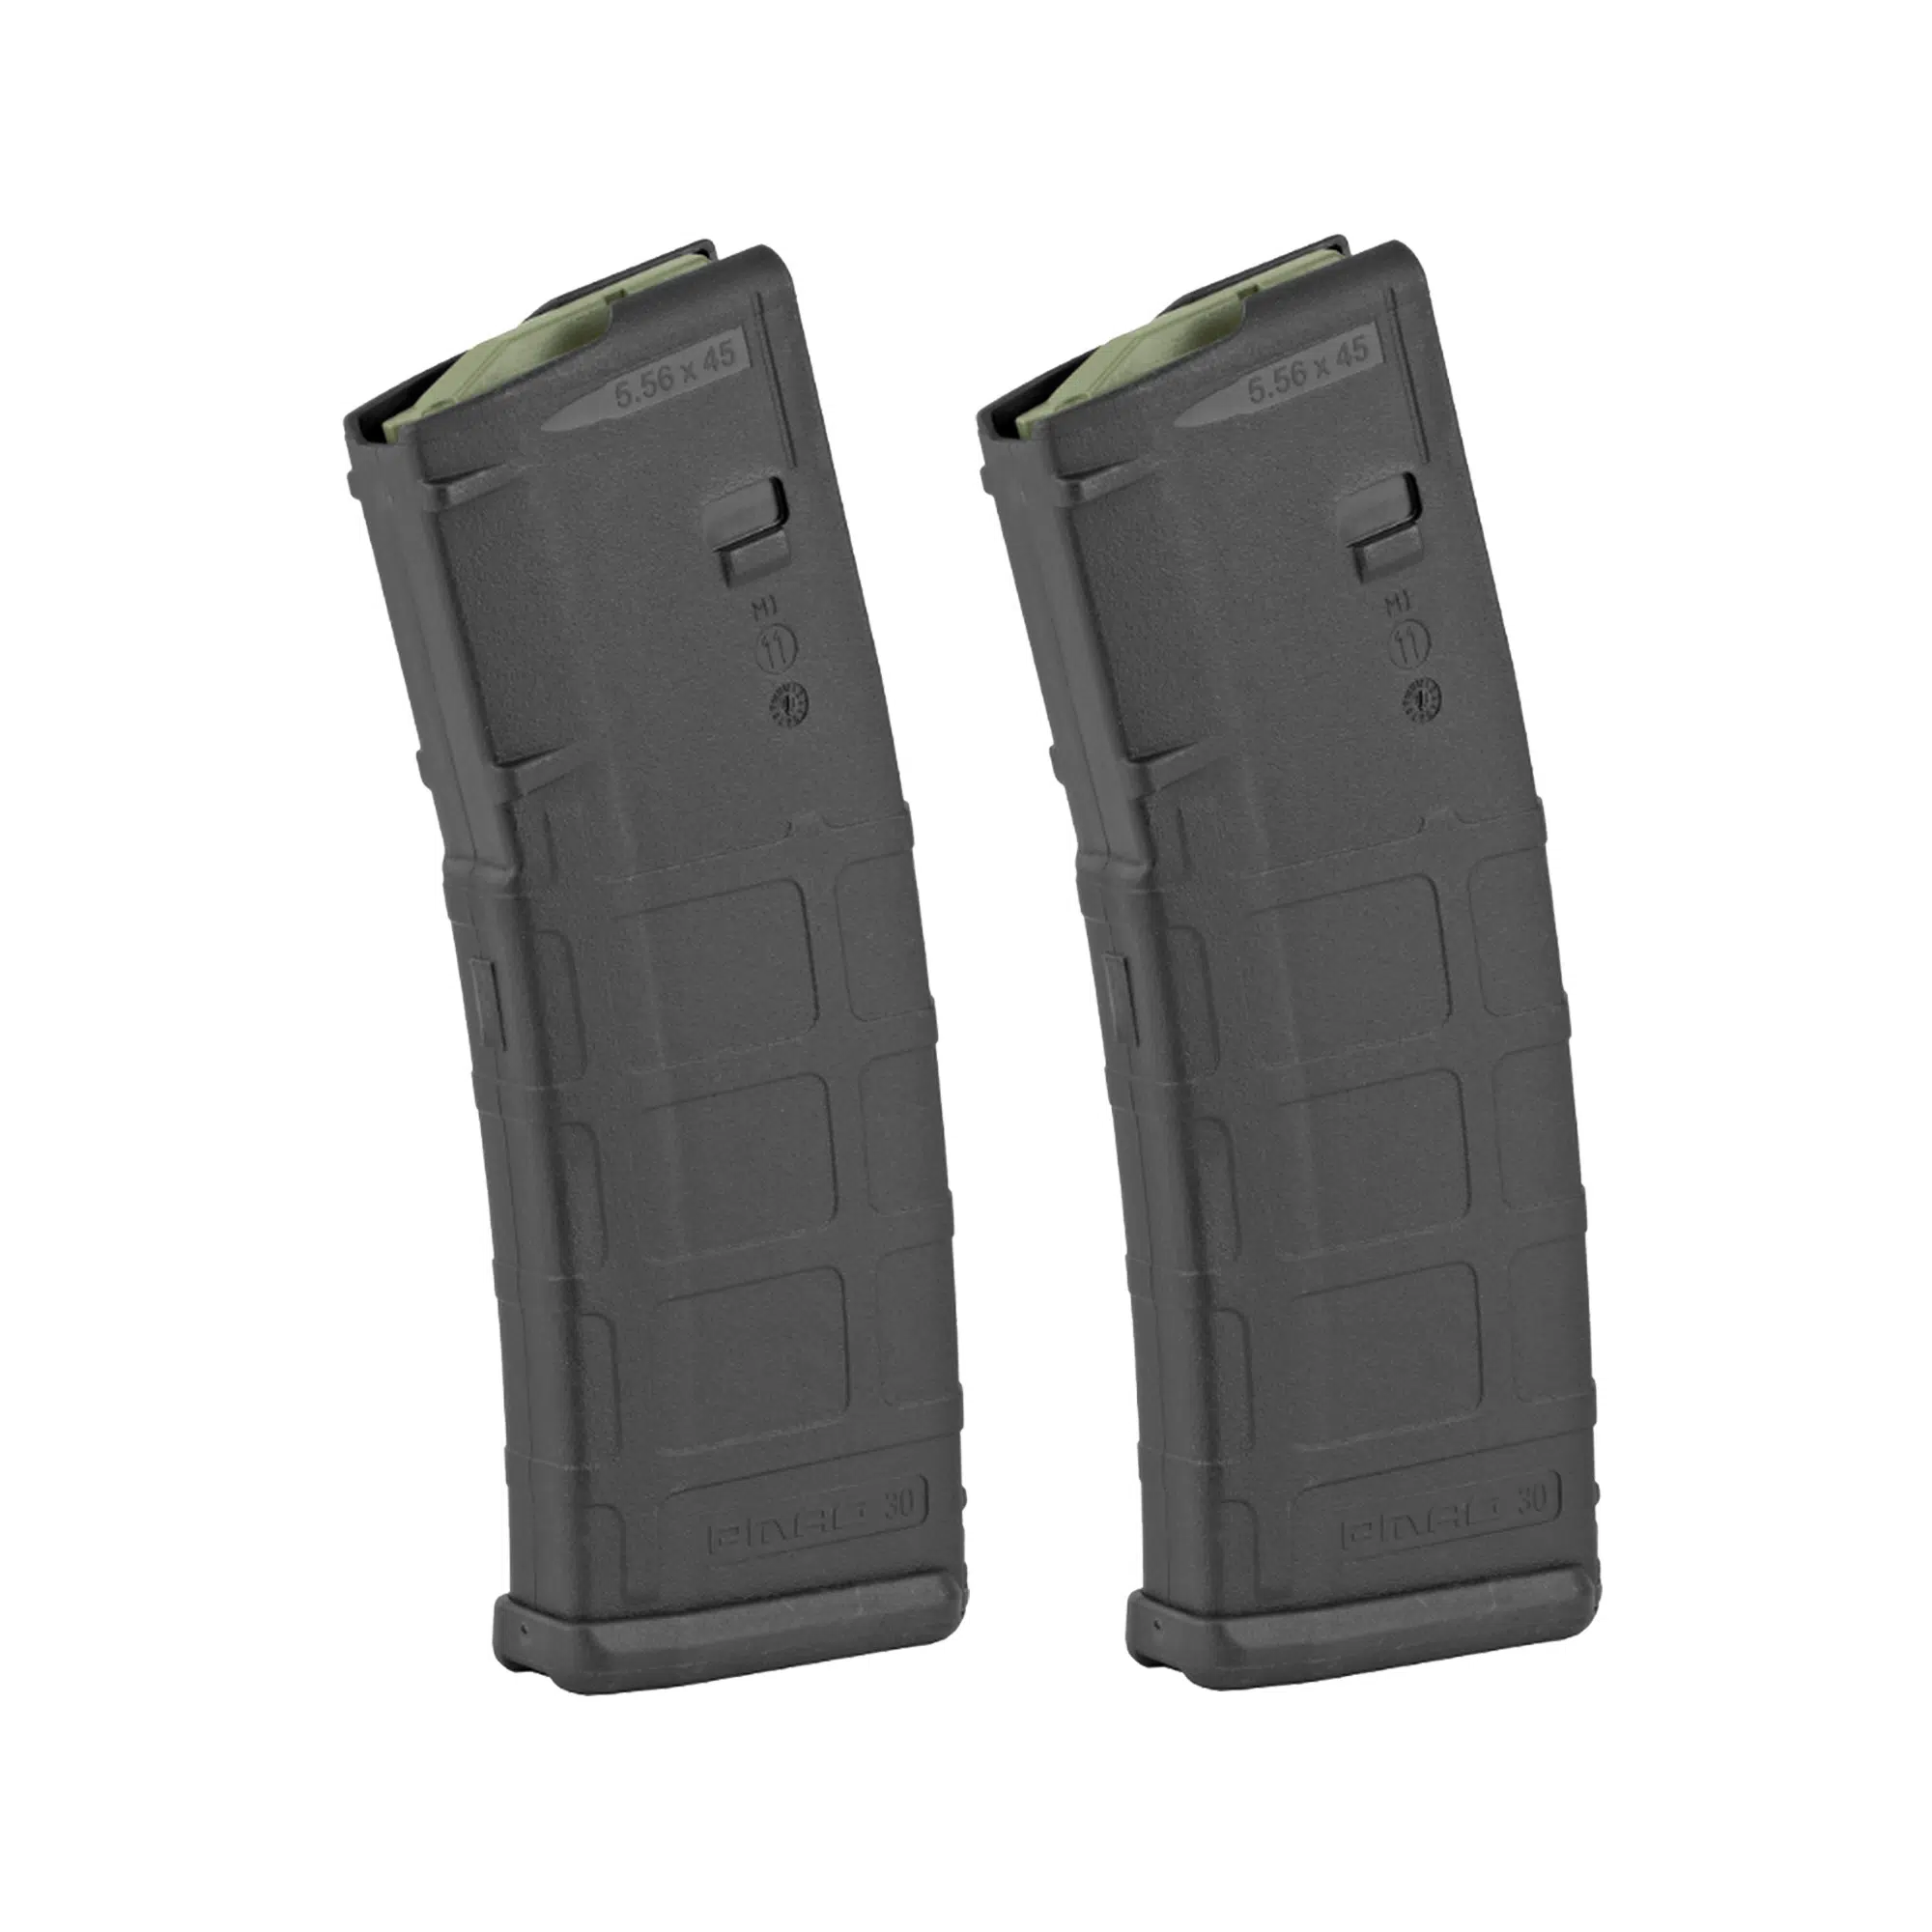 Magpul 30-Round Bulk AR 15 PMAGS M2 – .223 / 5.56 NATO - MAG571 - Available in 1, 2, 3, 10, 25, 50, and 100-Pack